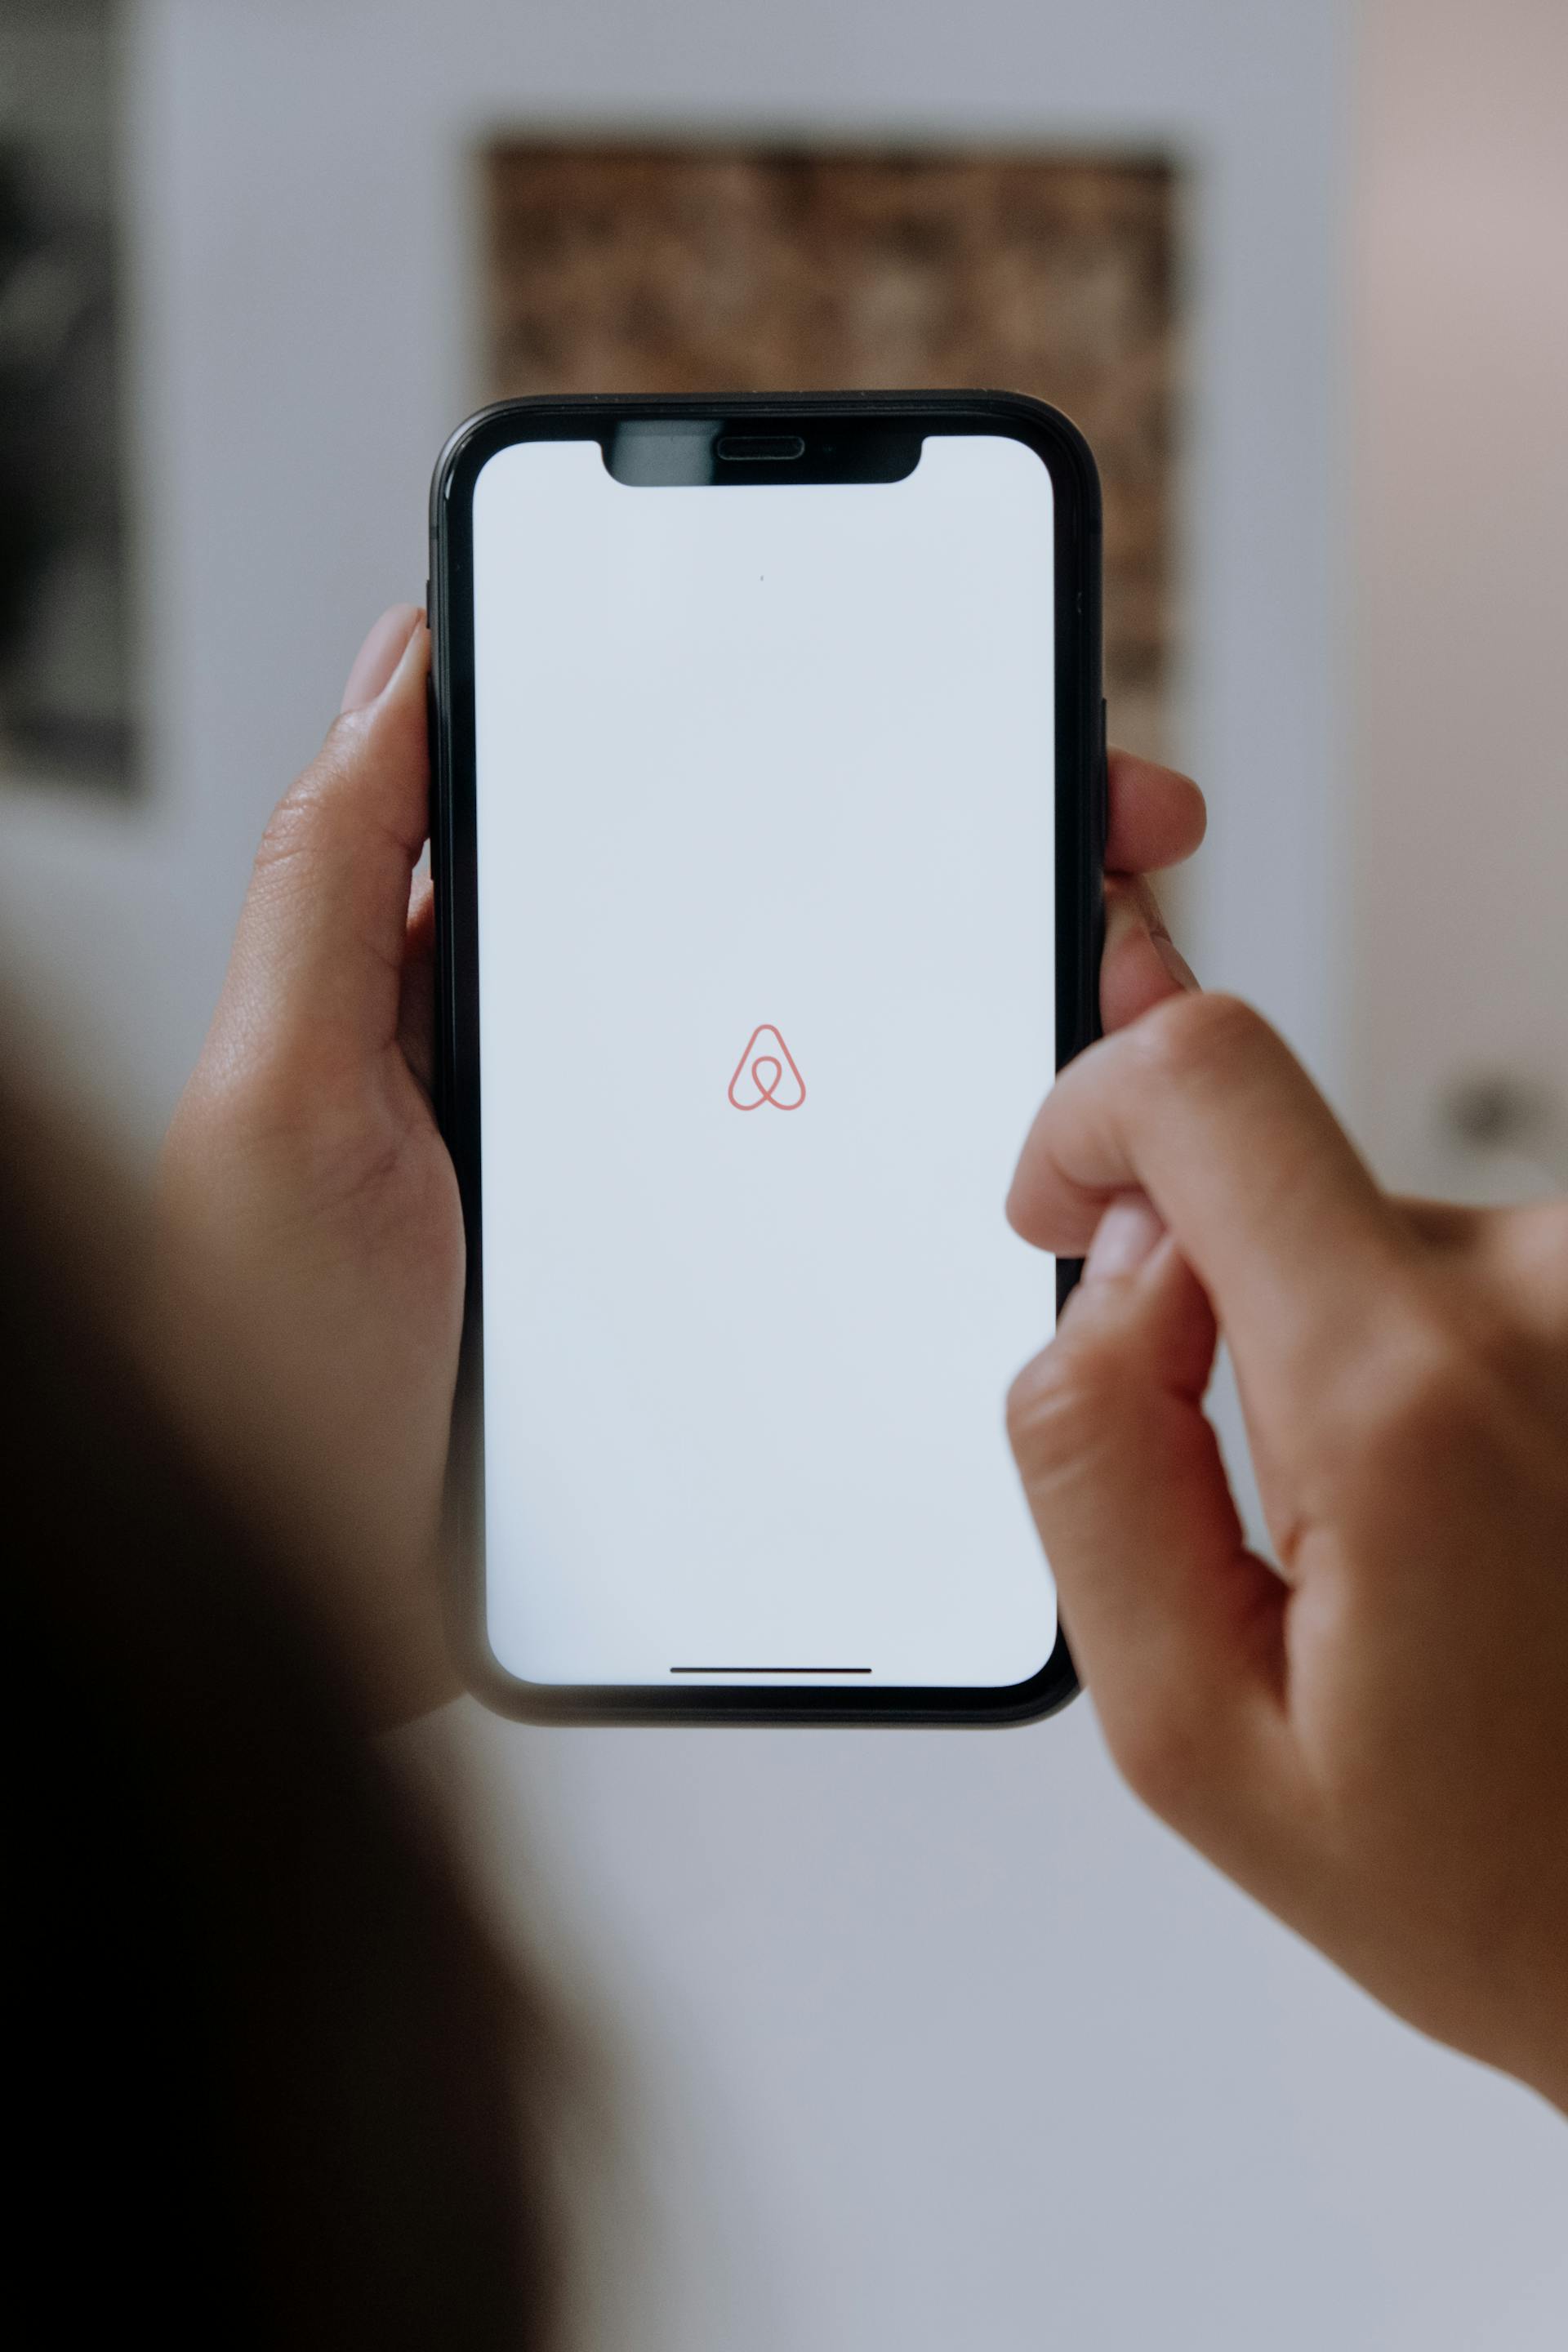 A phone opened to an Airbnb app | Source: Pexels